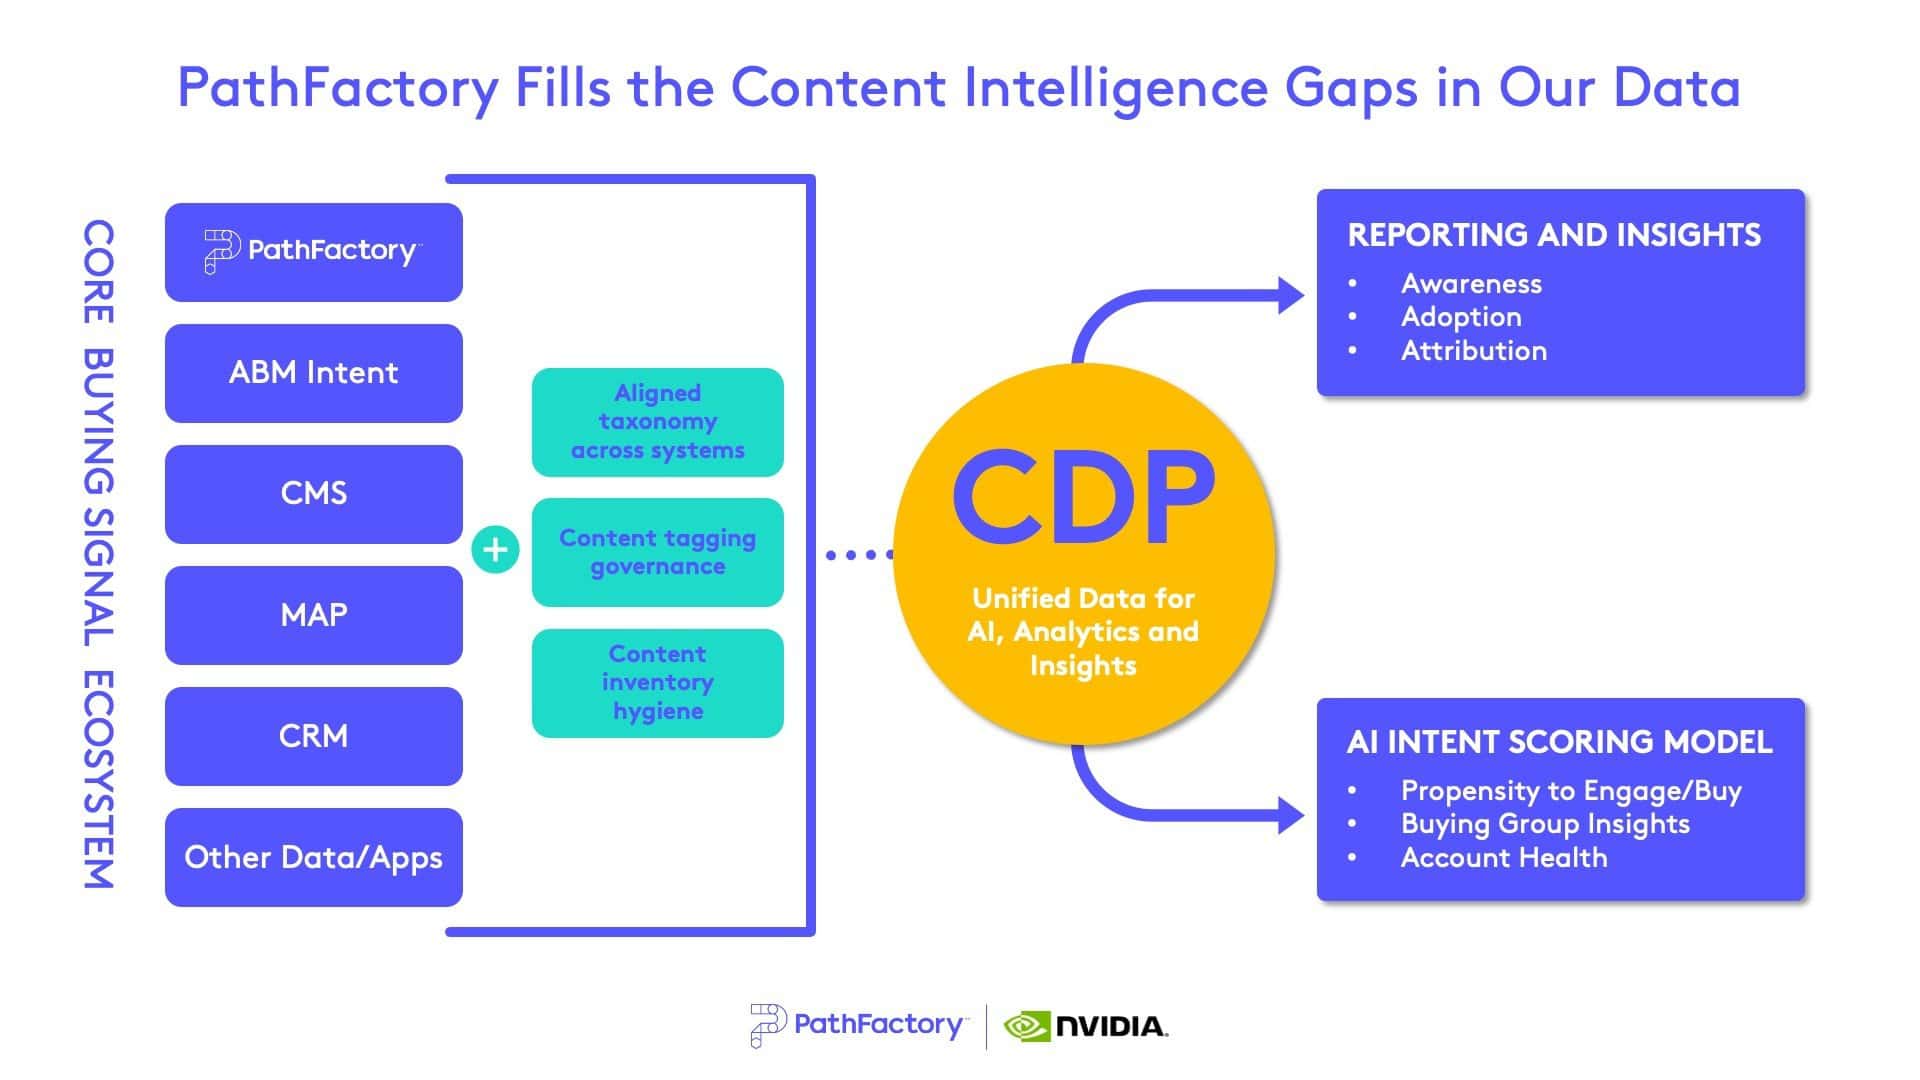 NVIDIA and PathFactory's diagram showing how PathFactory fills the content intelligence gap. 